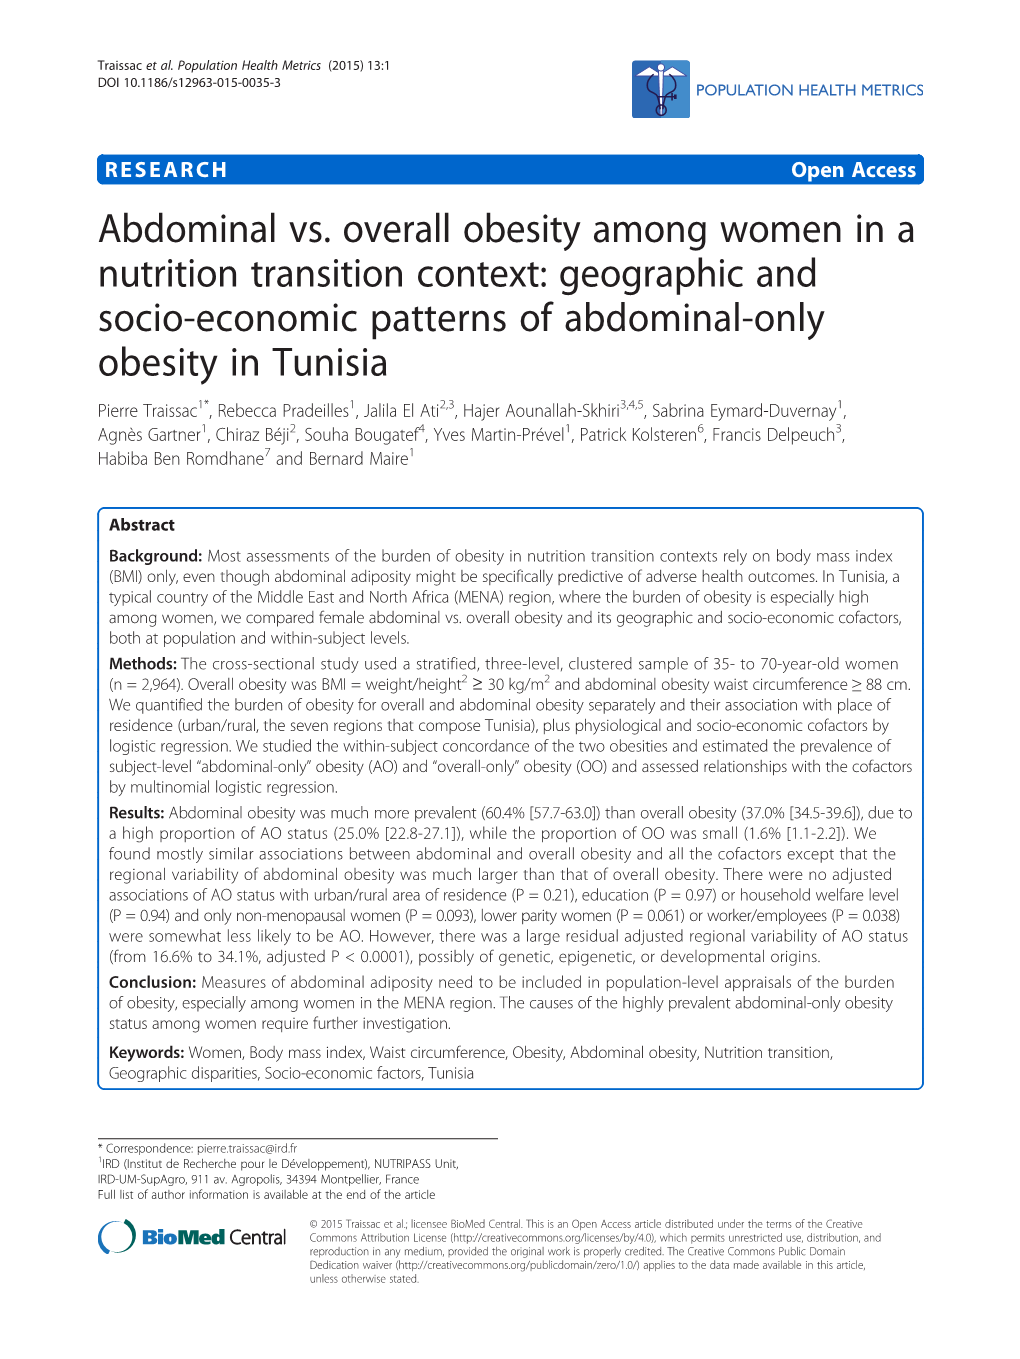 Abdominal Vs. Overall Obesity Among Women in a Nutrition Transition Context